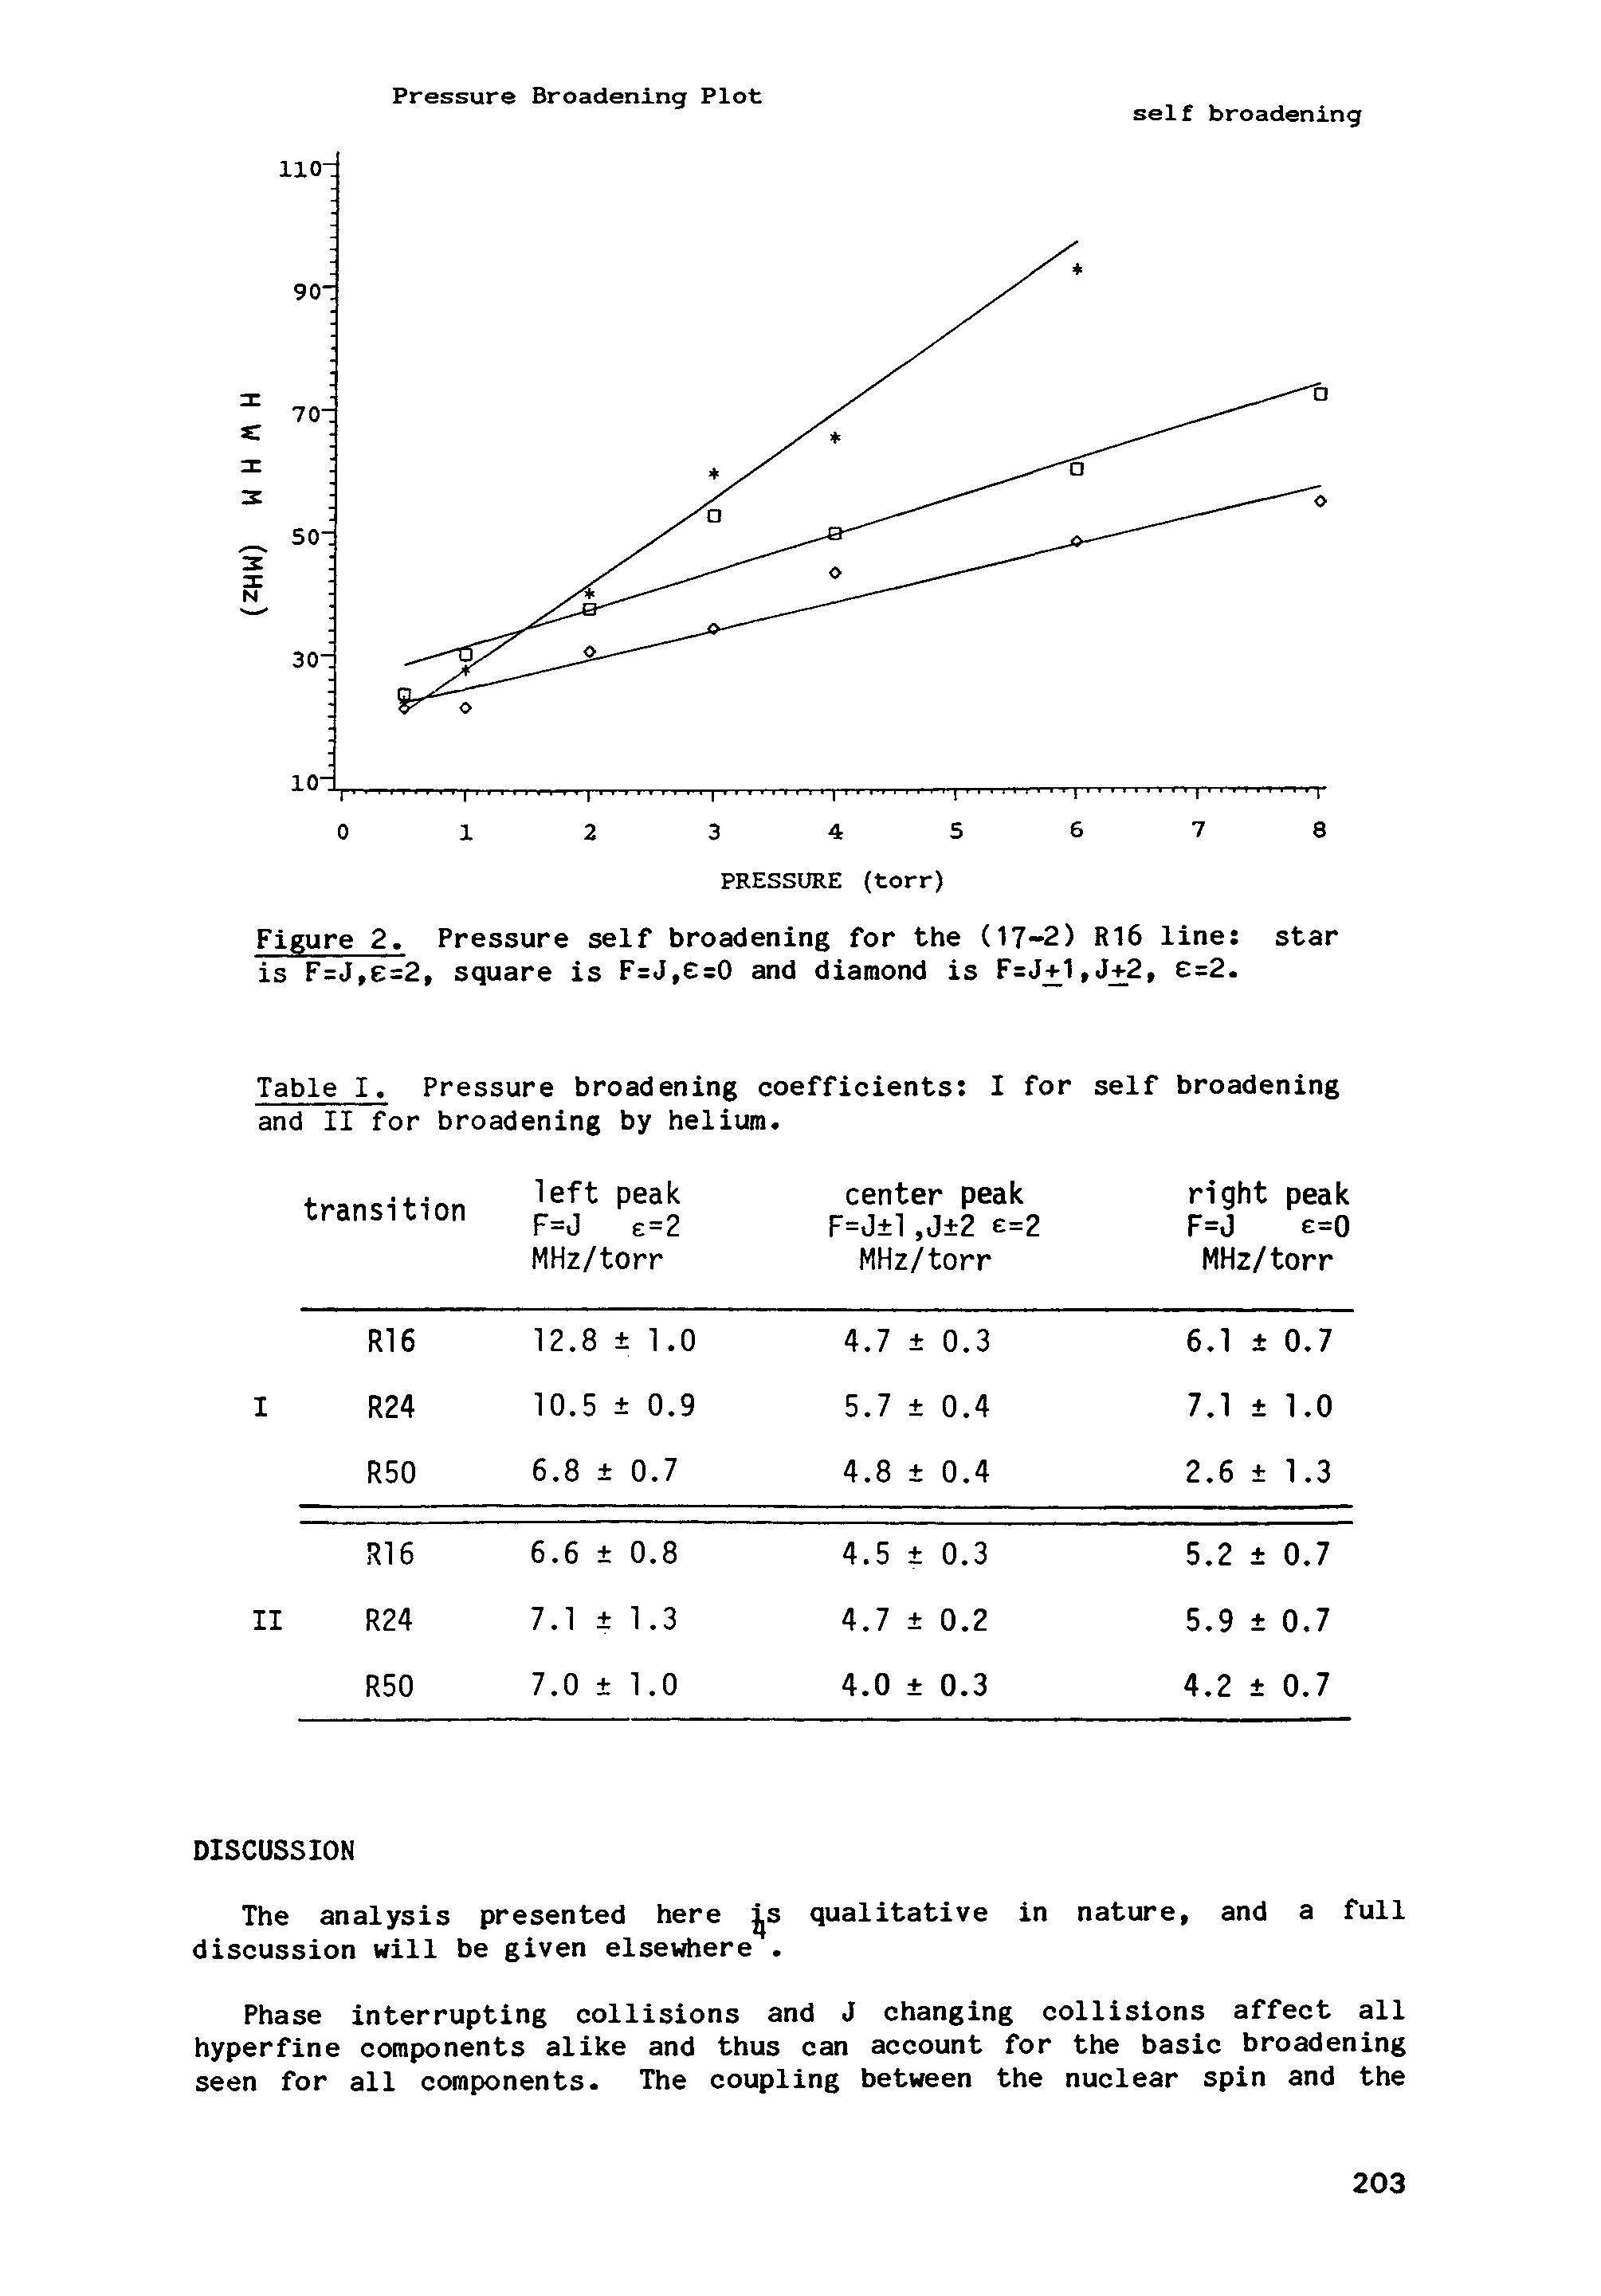 Table I. Pressure broadening coefficients I for self broadening and II for broadening by helium.